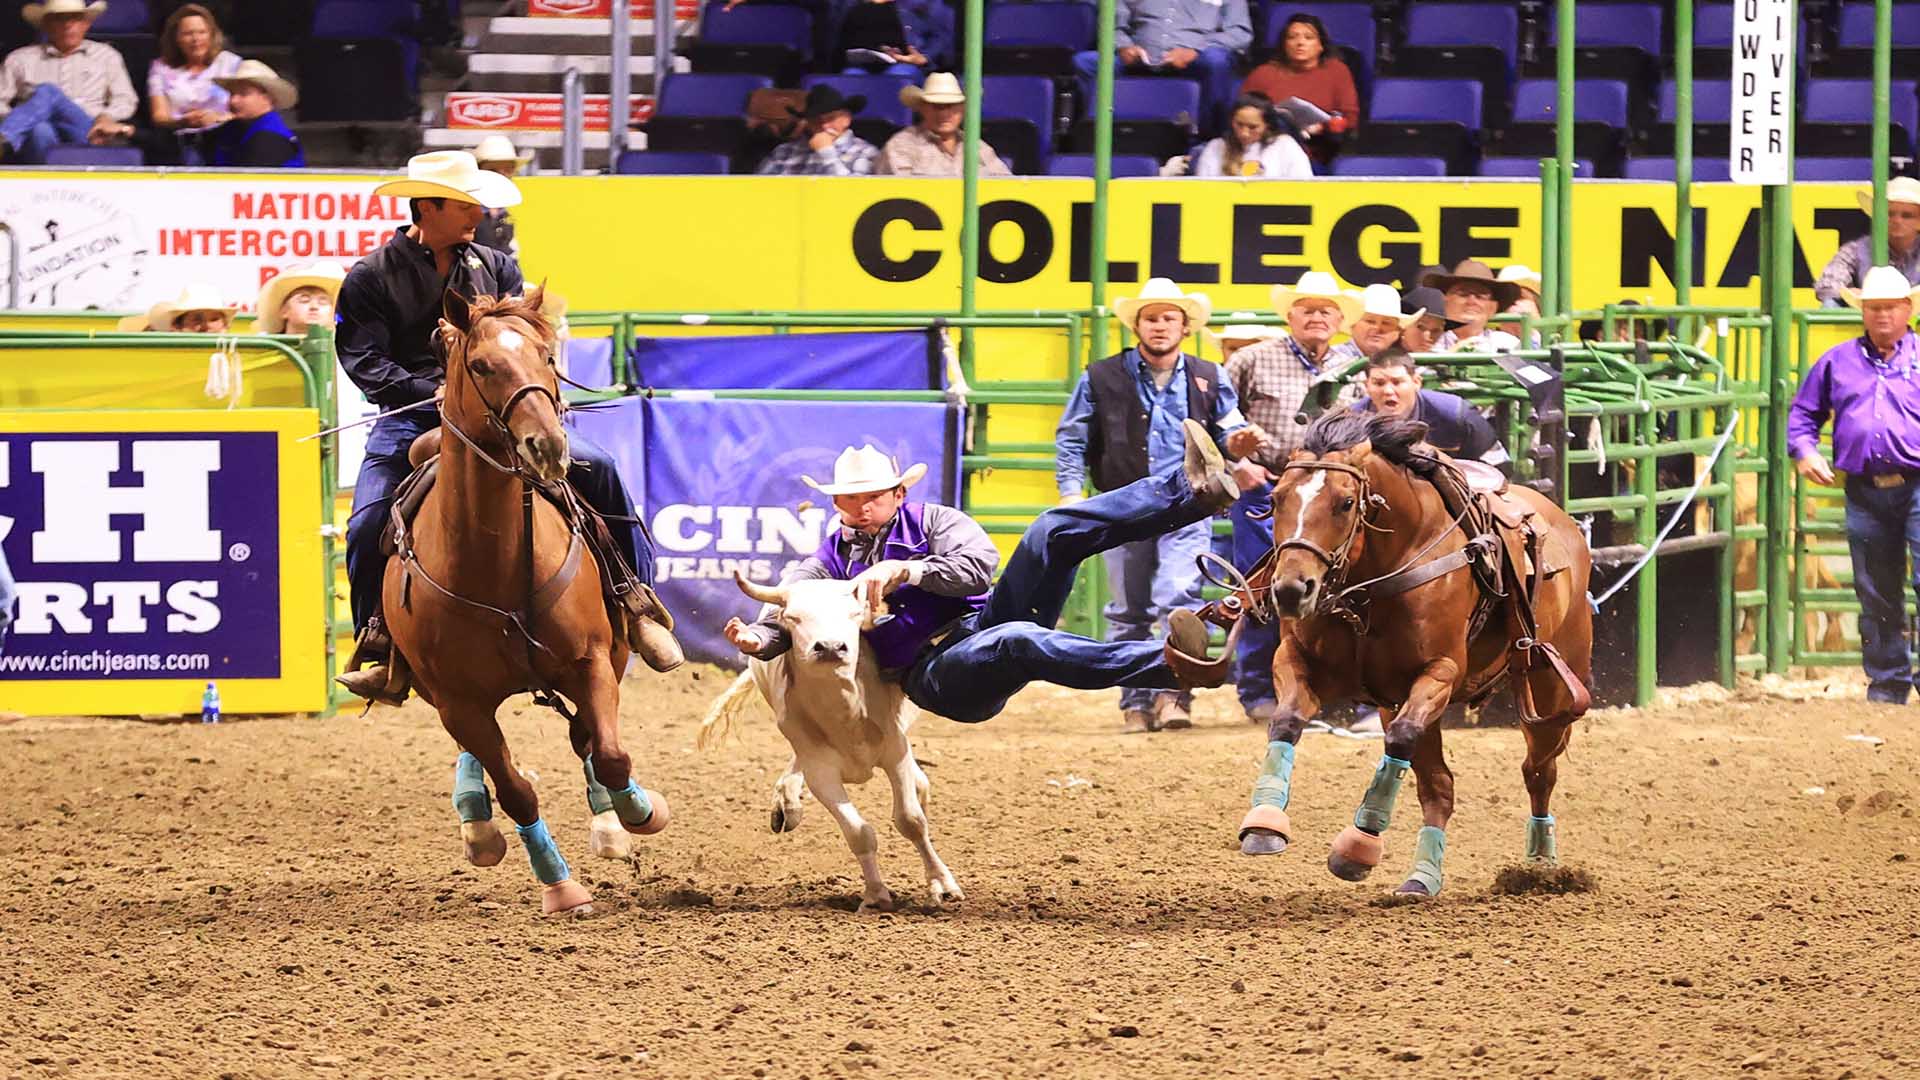 College National Finals Rodeo 2022 Schedule, Live Coverage, CNFR on TV